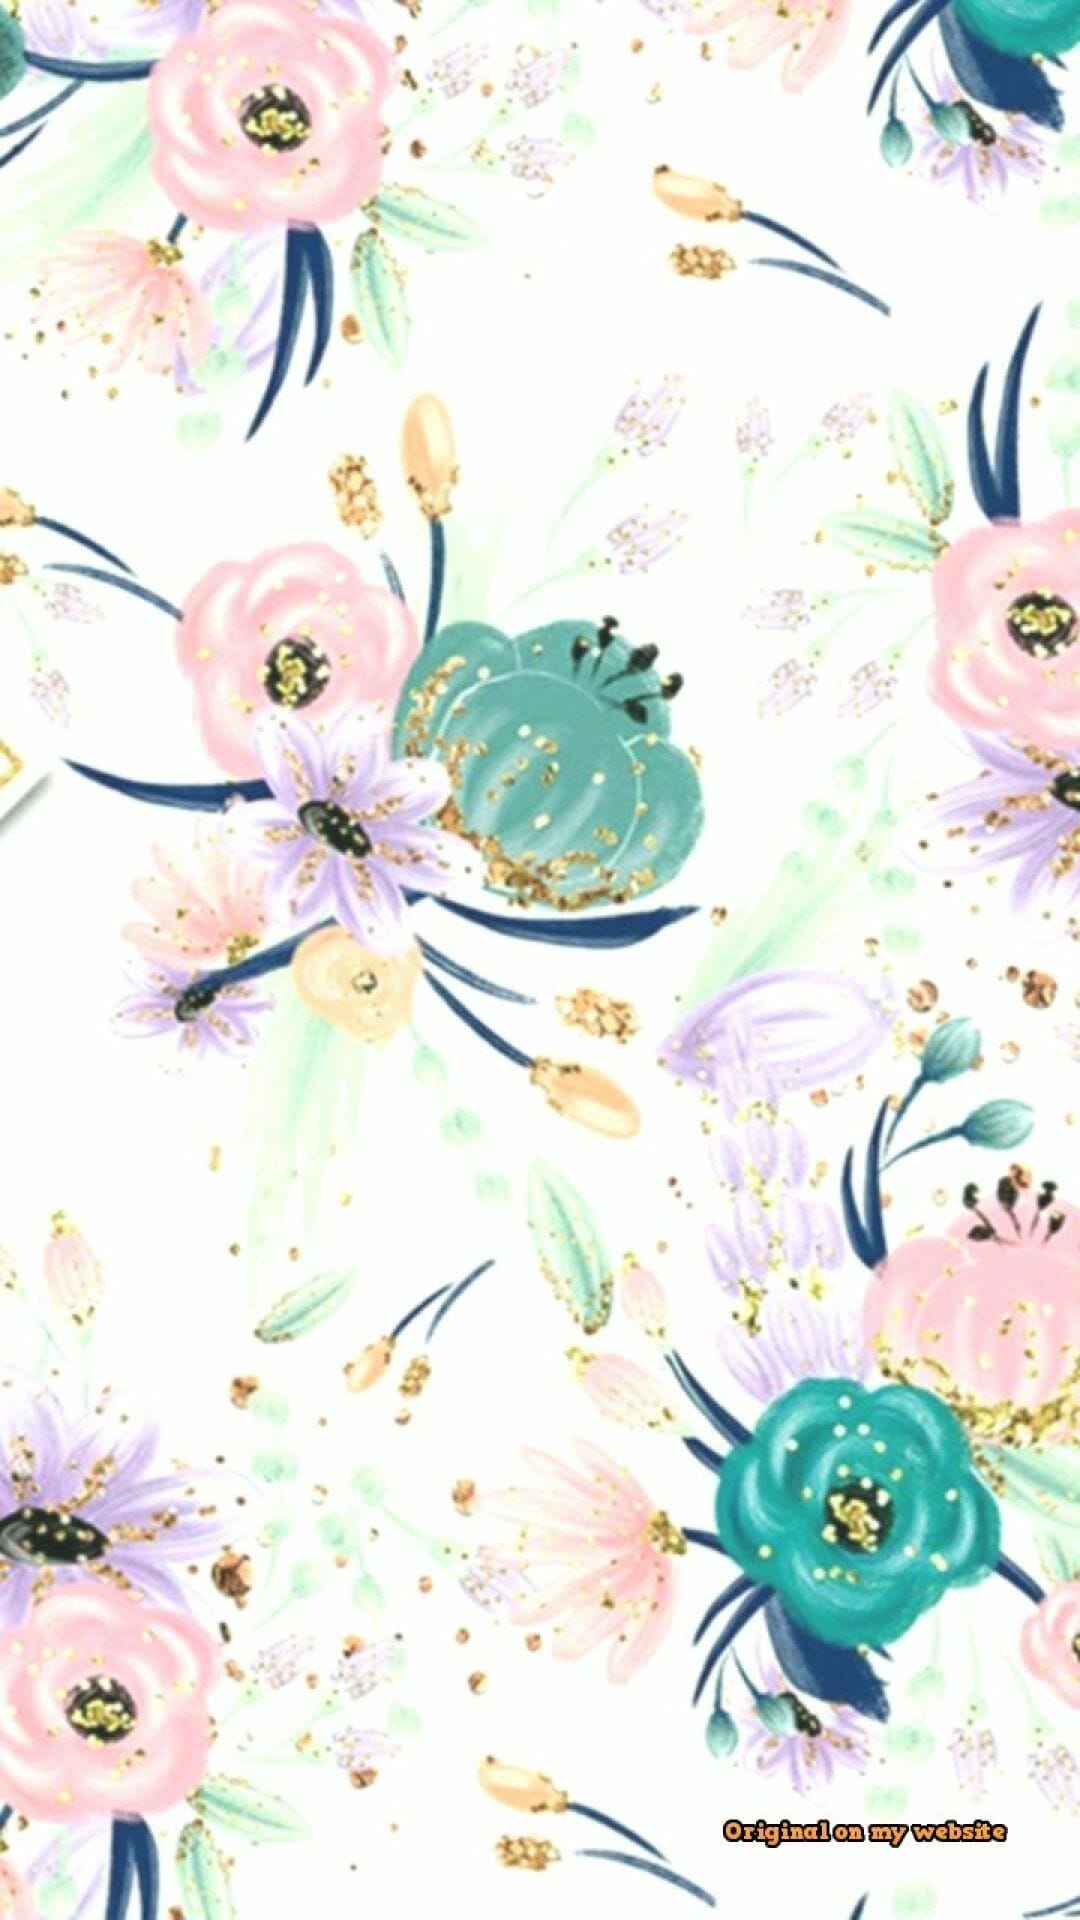 Wallpaper iPhone Aesthetic Spring Flower Pattern / iPhone HD Wallpaper Background Download HD Wallpaper (Desktop Background / Android / iPhone) (1080p, 4k) (1080x1920) (2021)